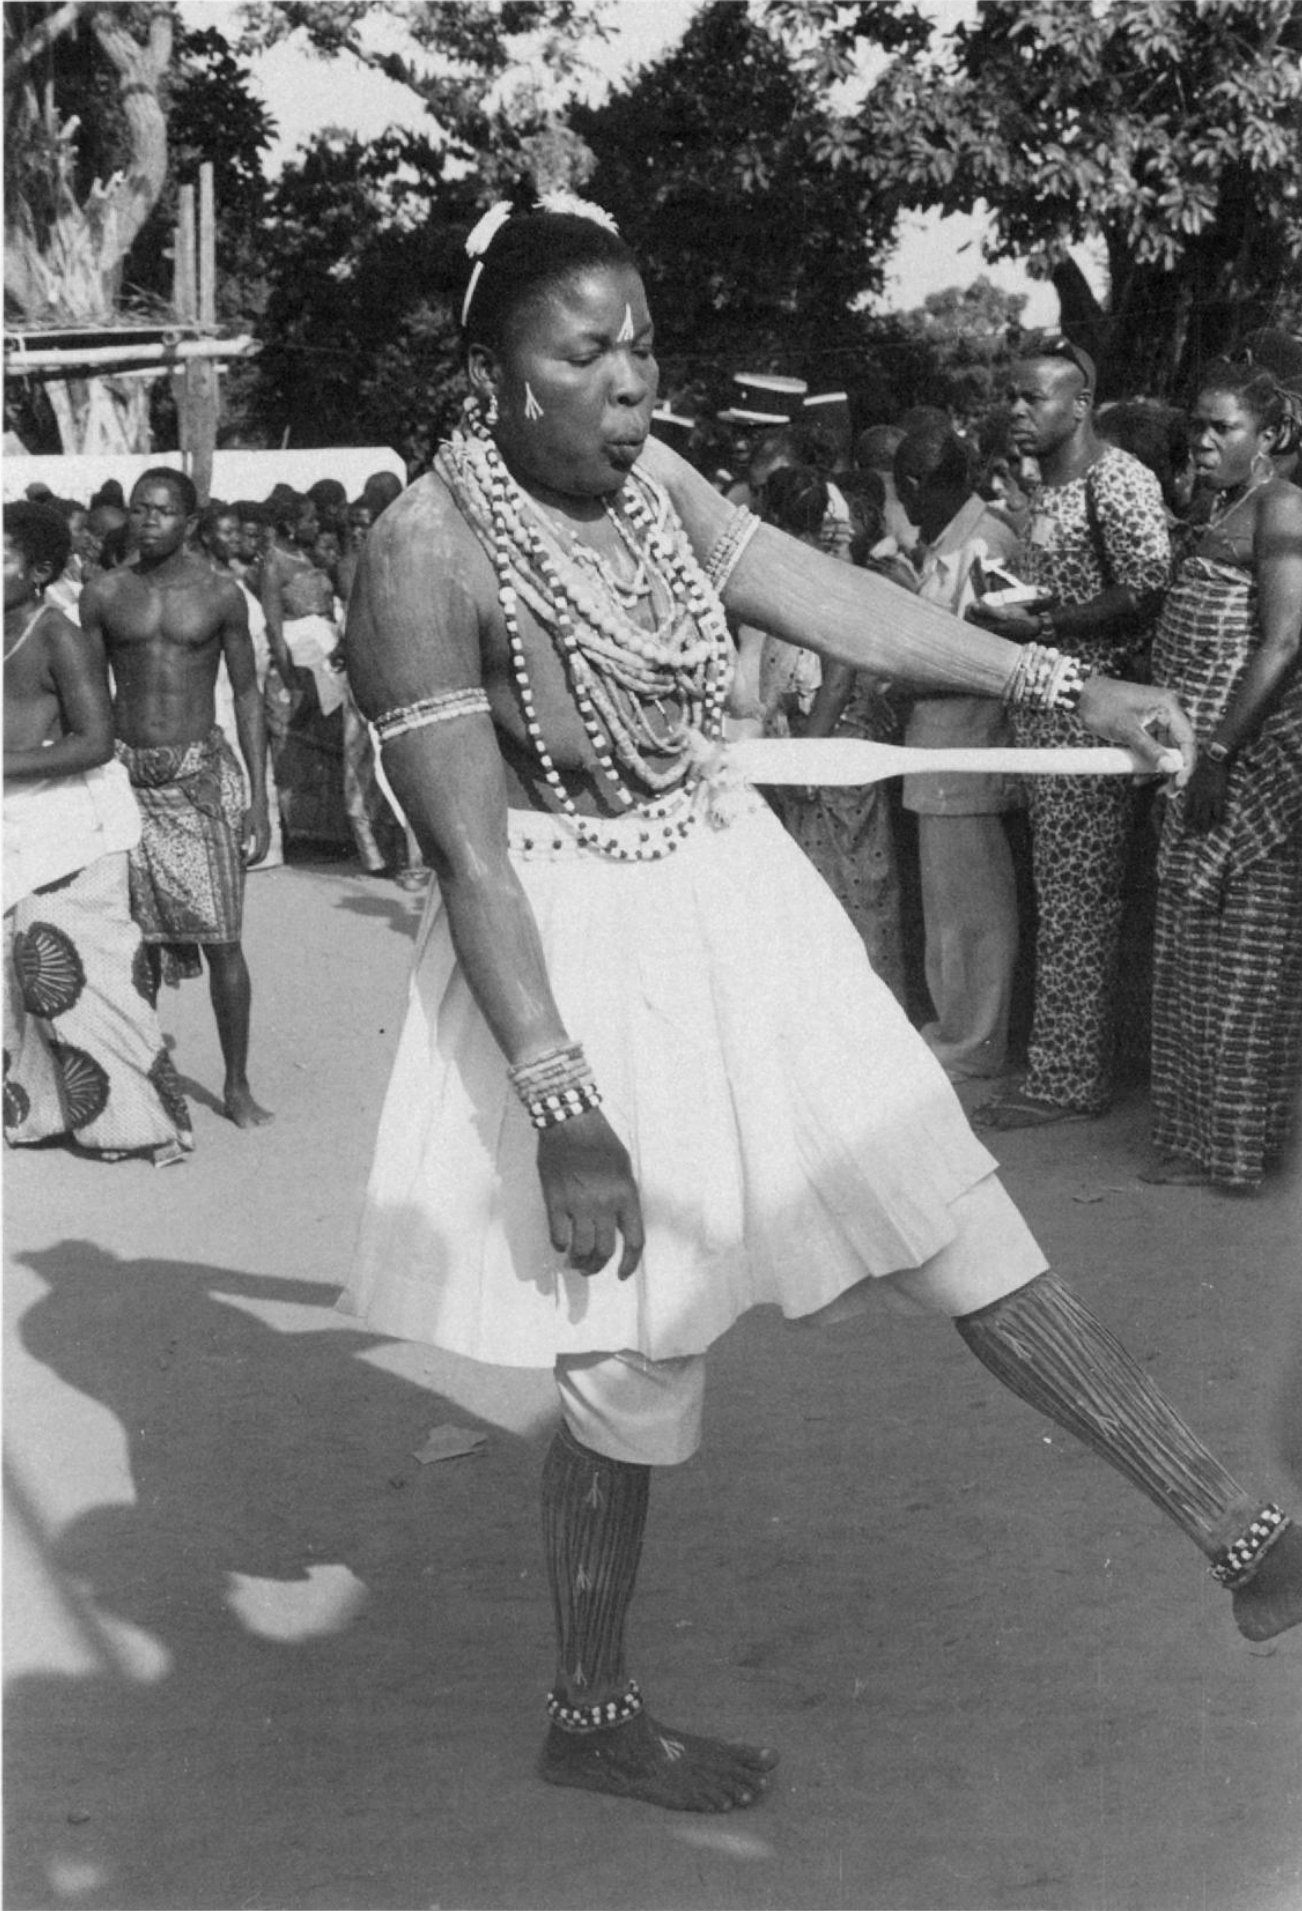   A Mami Wata medium, a trident paddle on her hip, lines, and tridents painted on her body with powdered white clay, and rainbow serpent beads hung around her neck-leans in an off-balance pose during trance before beginning her dance. Togo, Mina, 197